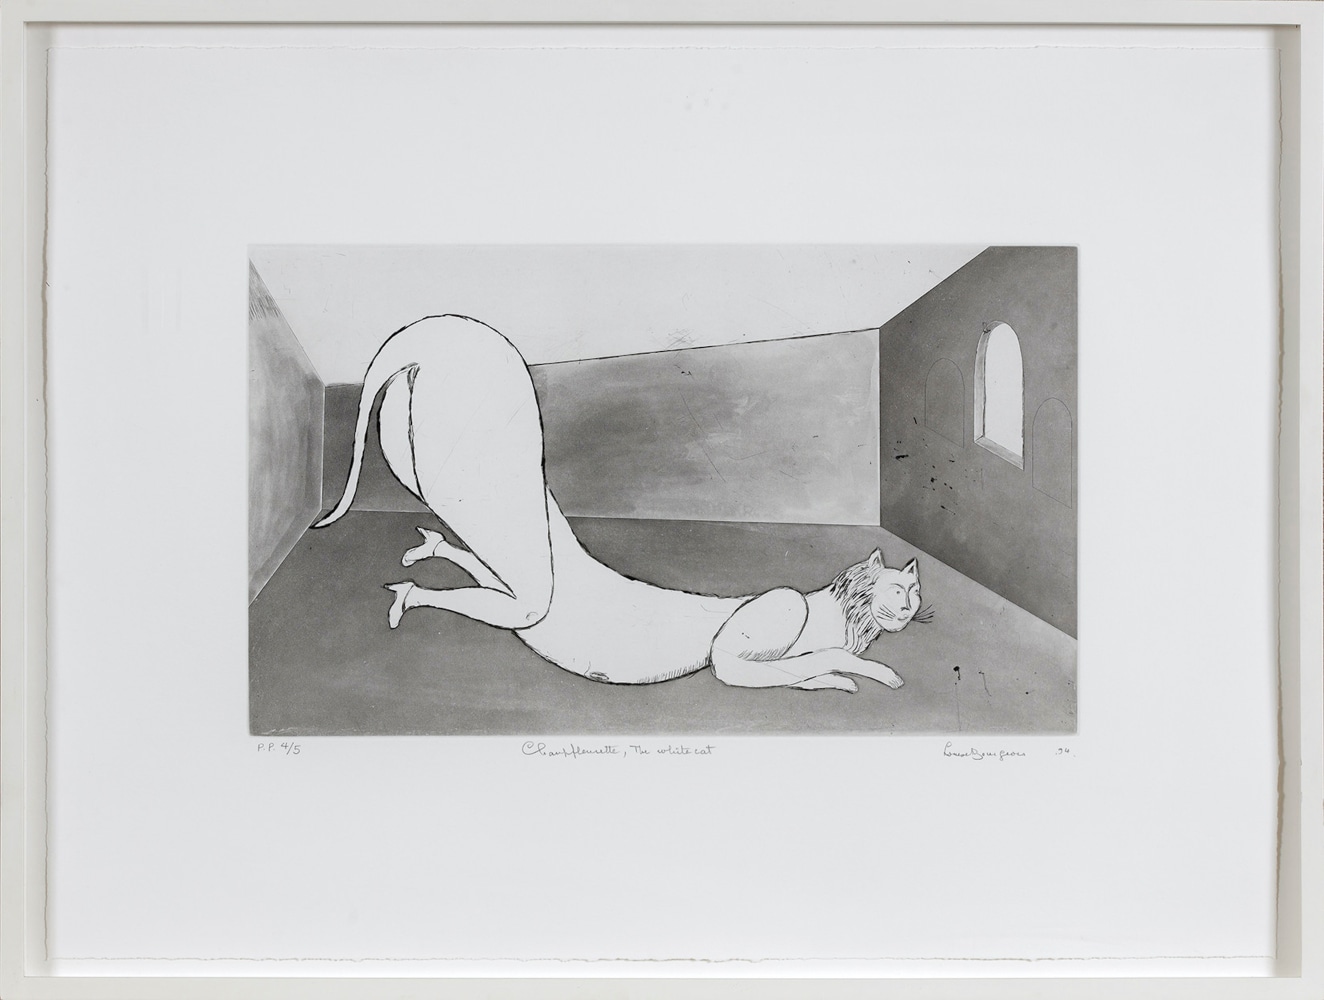 Champfleurette, the White Cat, 1994

drypoint, etching and aquatint, edition of 22 + 10 AP + 5 PP

18 1/2 x 25 in. / 47 x 63.5 cm